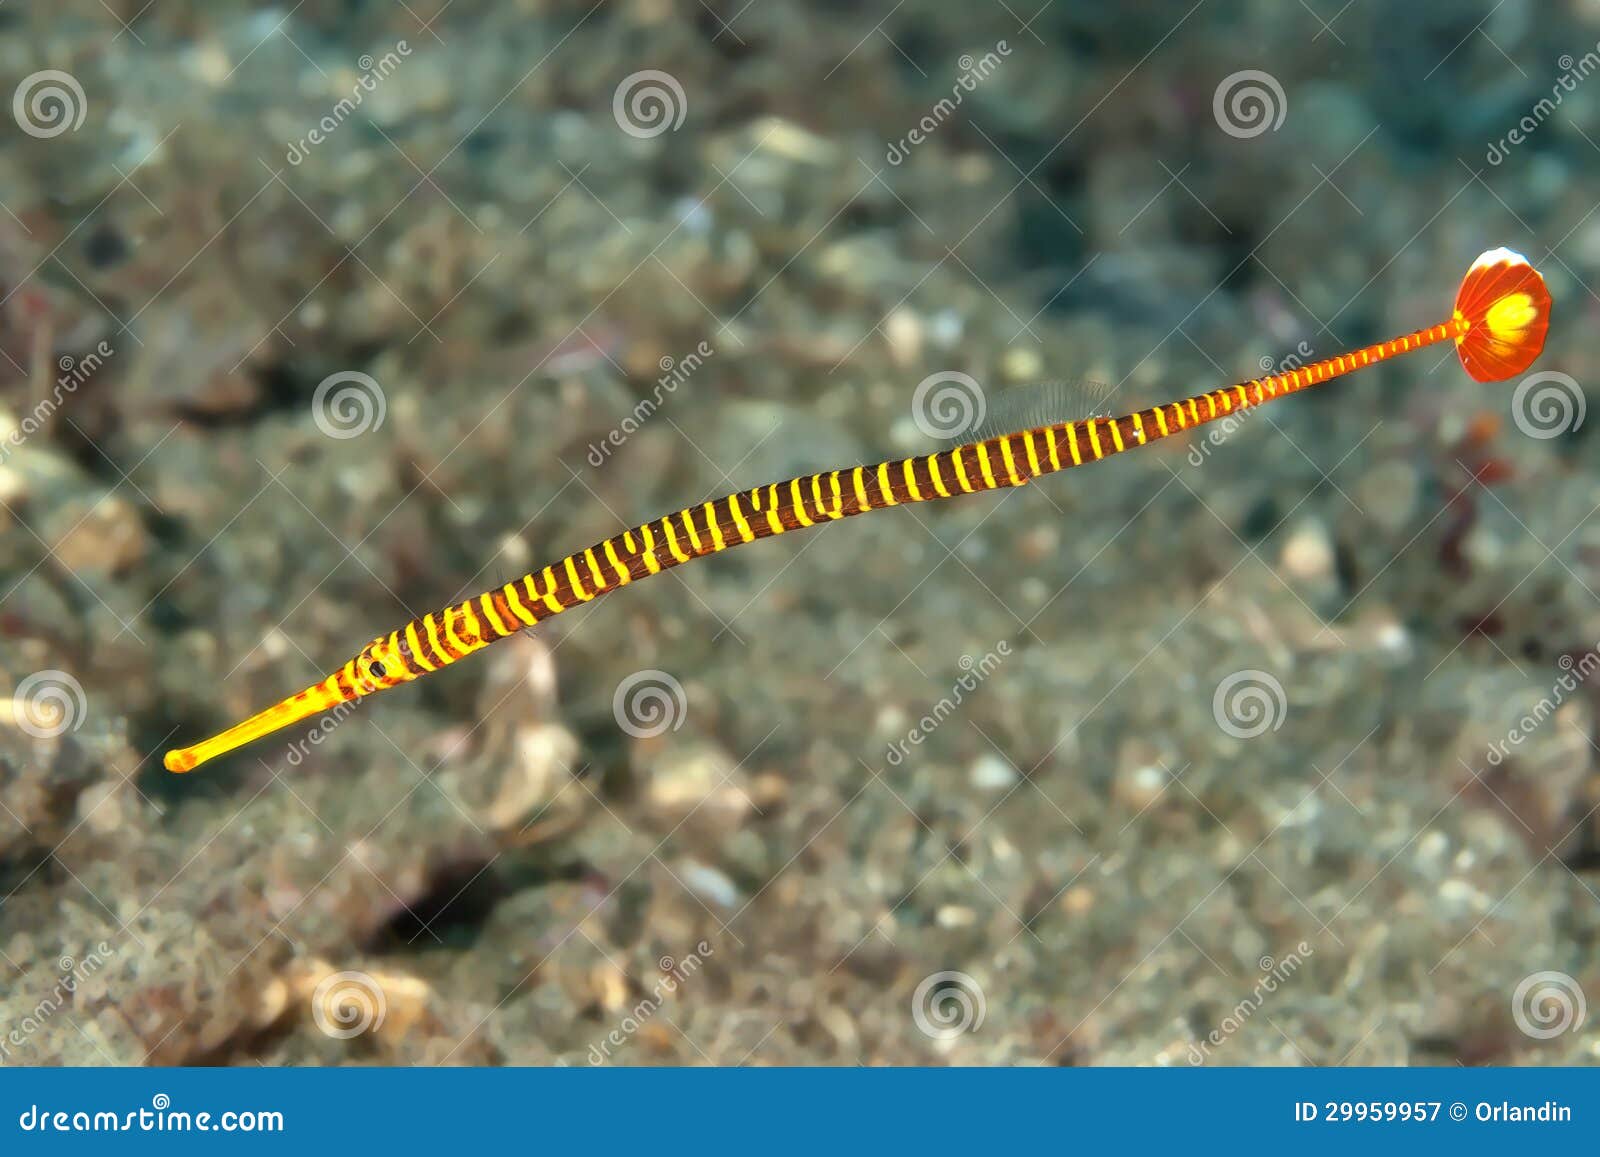 yellow banded pipefish